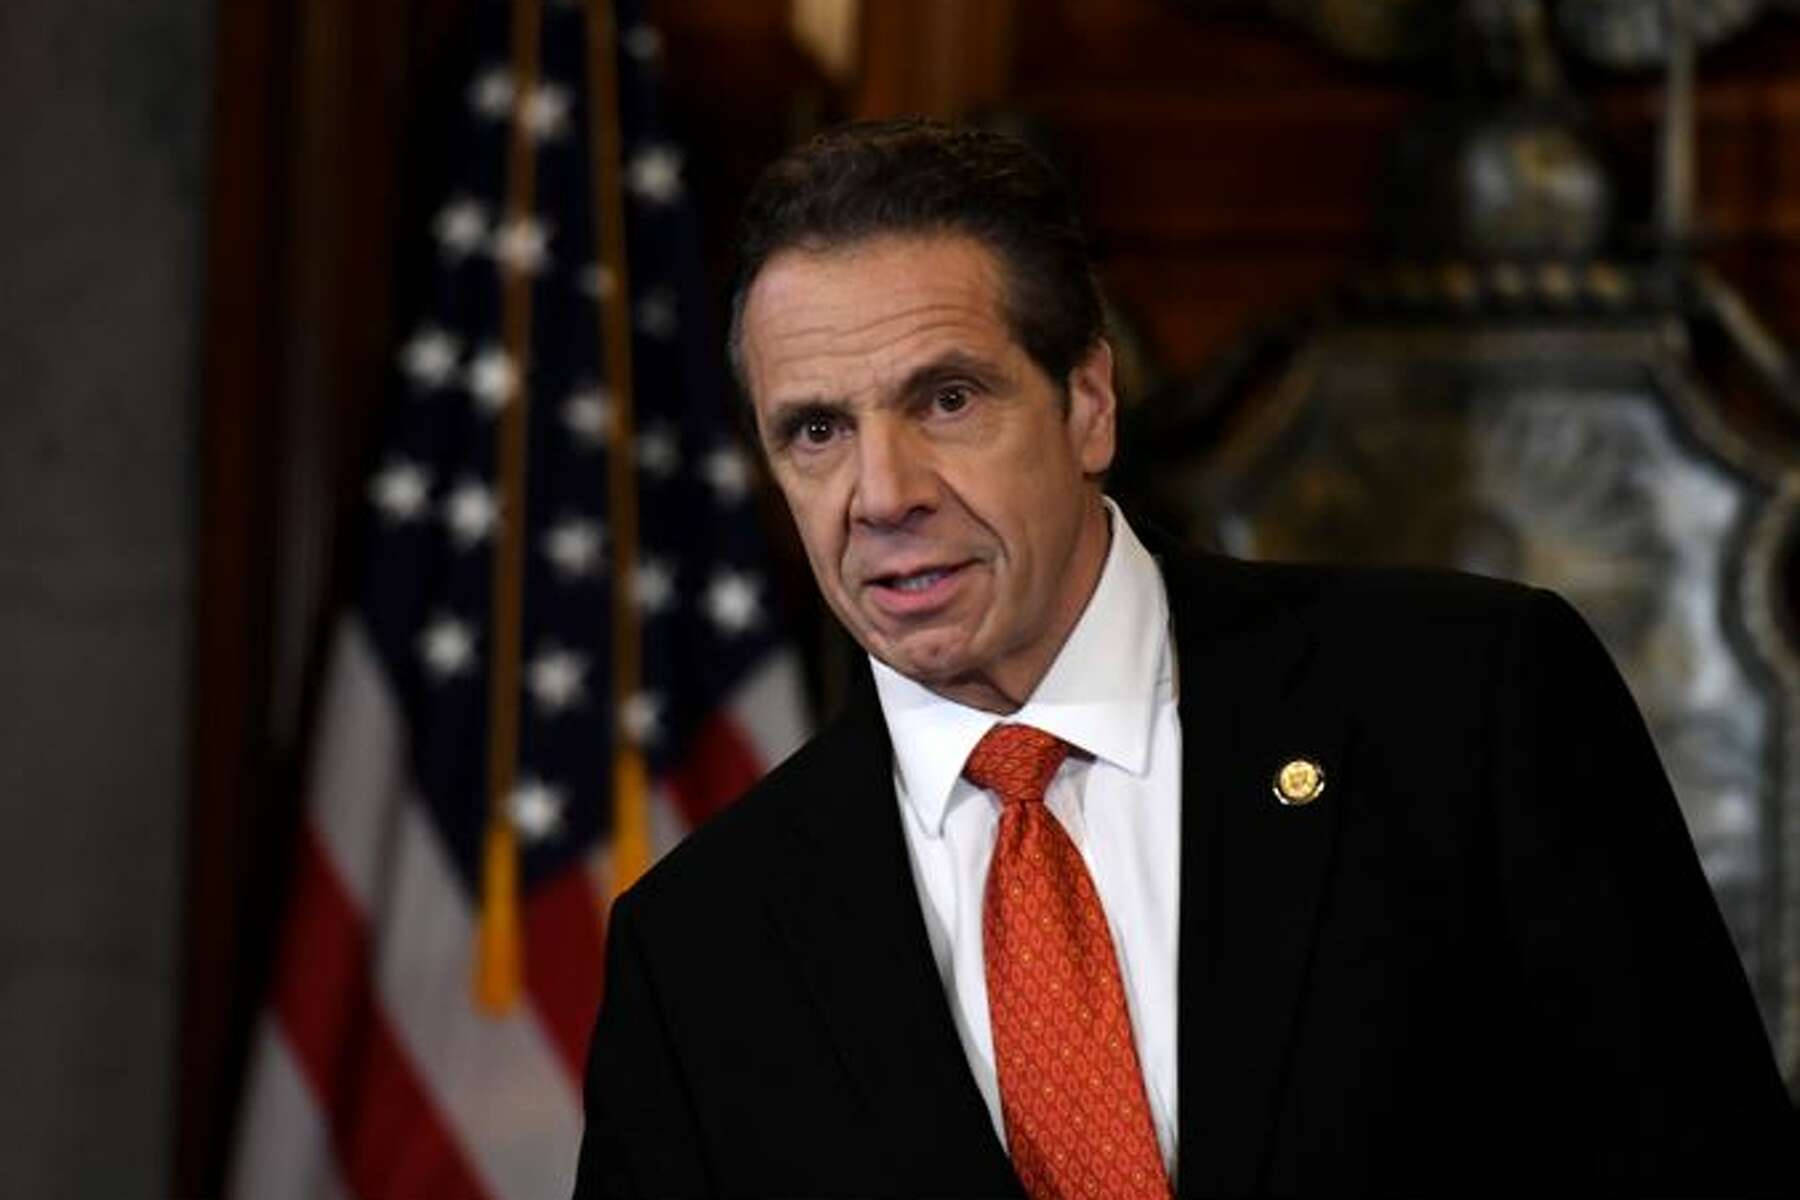 Andrew Cuomo Leaning Wallpaper